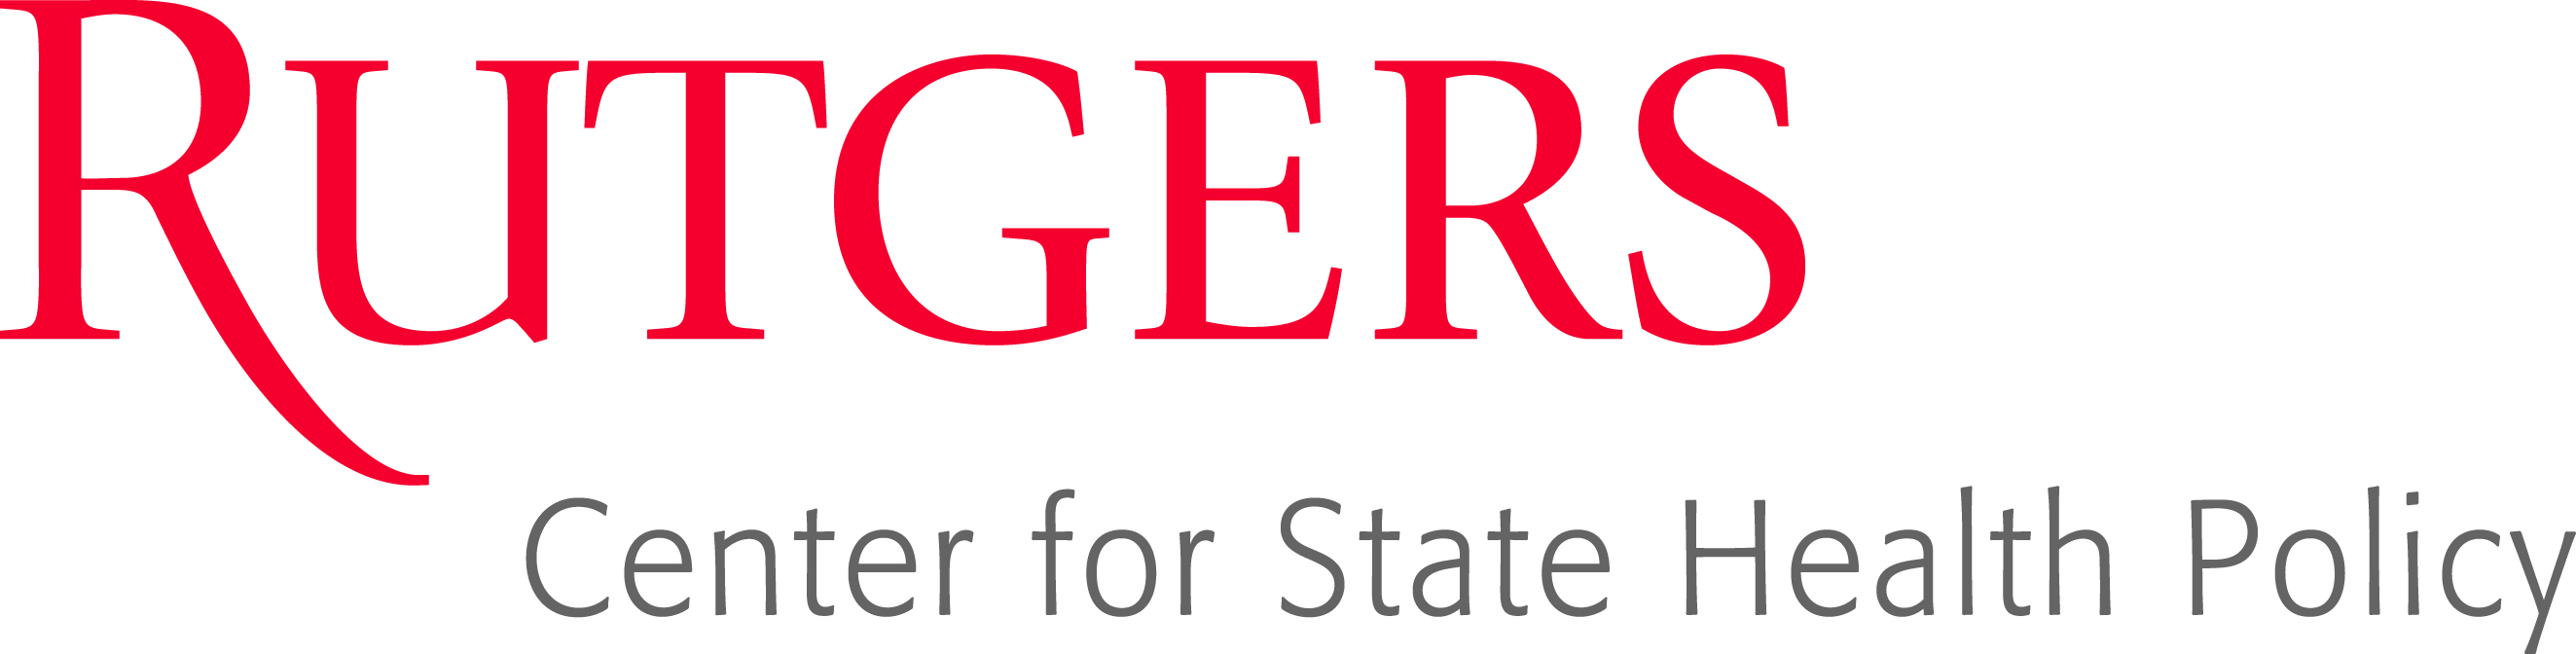 rutgers_center_for_state_health_policy